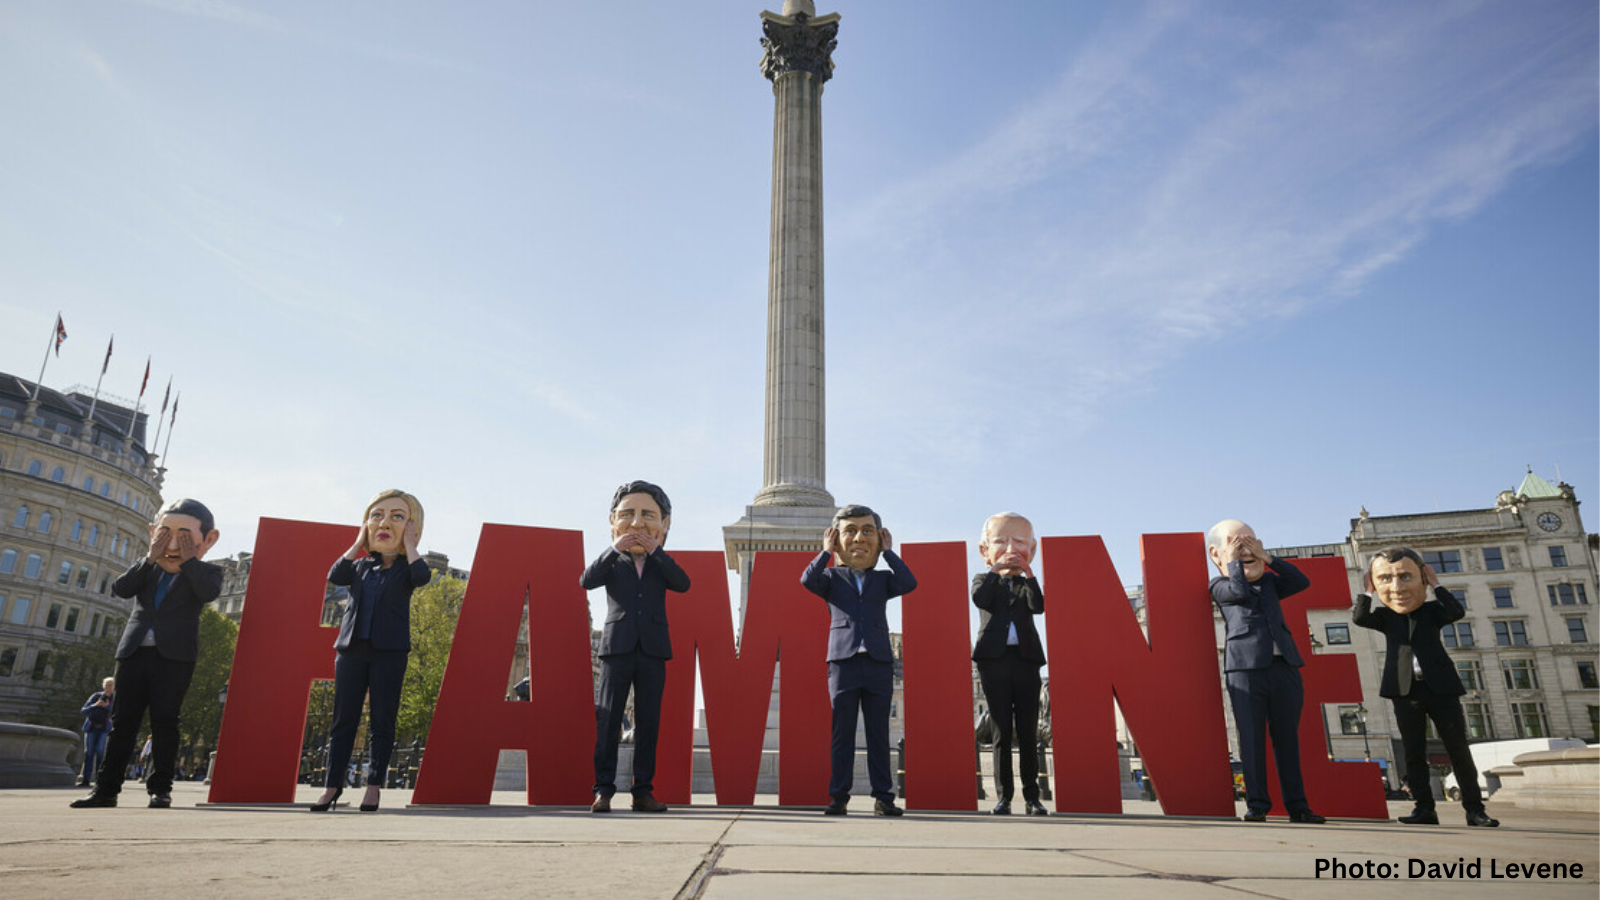 Image of Oxfam Big Heads in London in front of word FAMINE